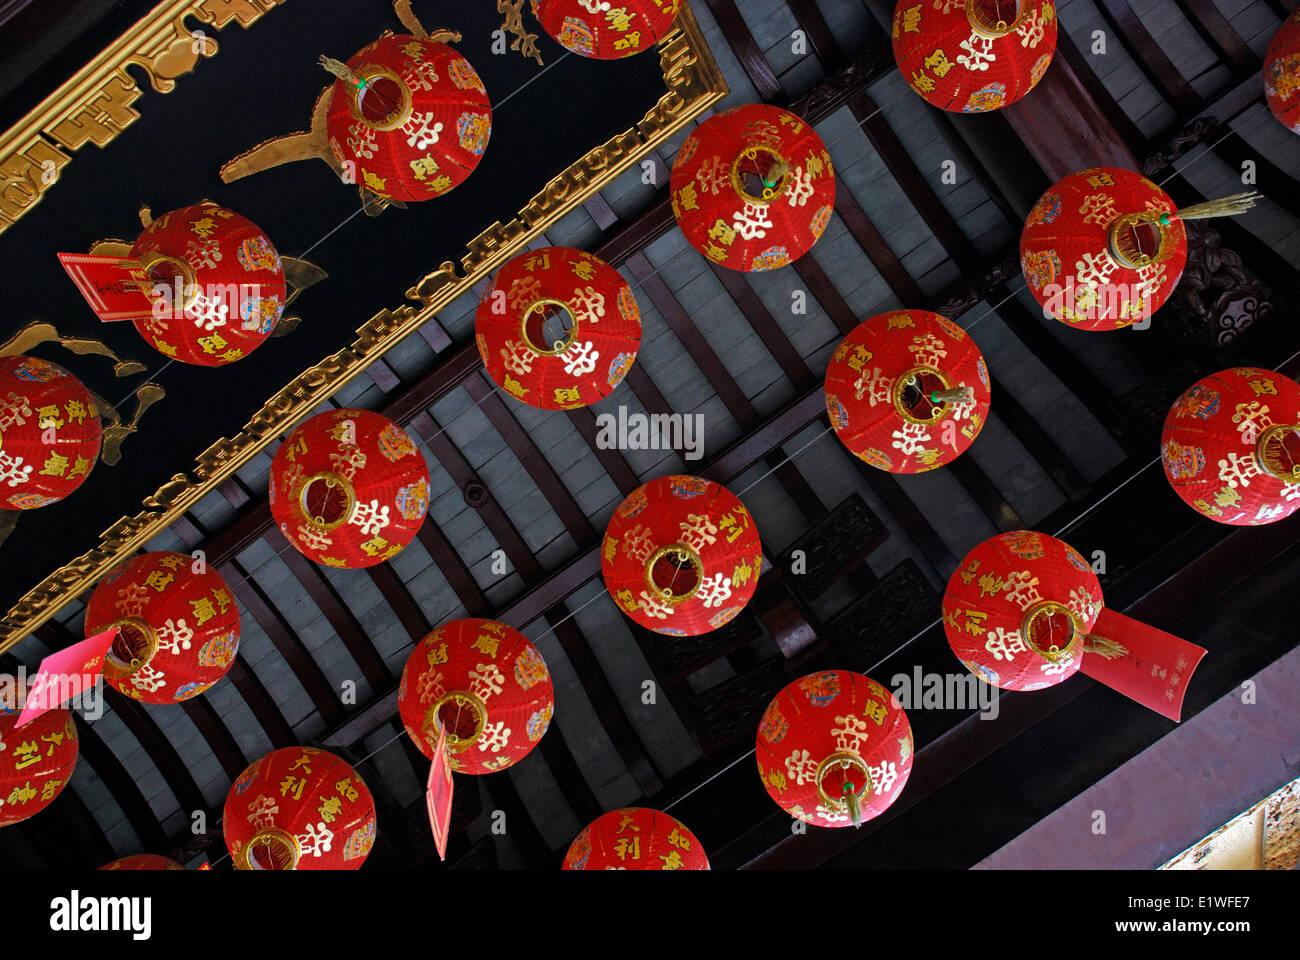 Lanterns in a buddhist temple in traditional Chinese town of Zhouzhuang near Shanghai Stock Photo